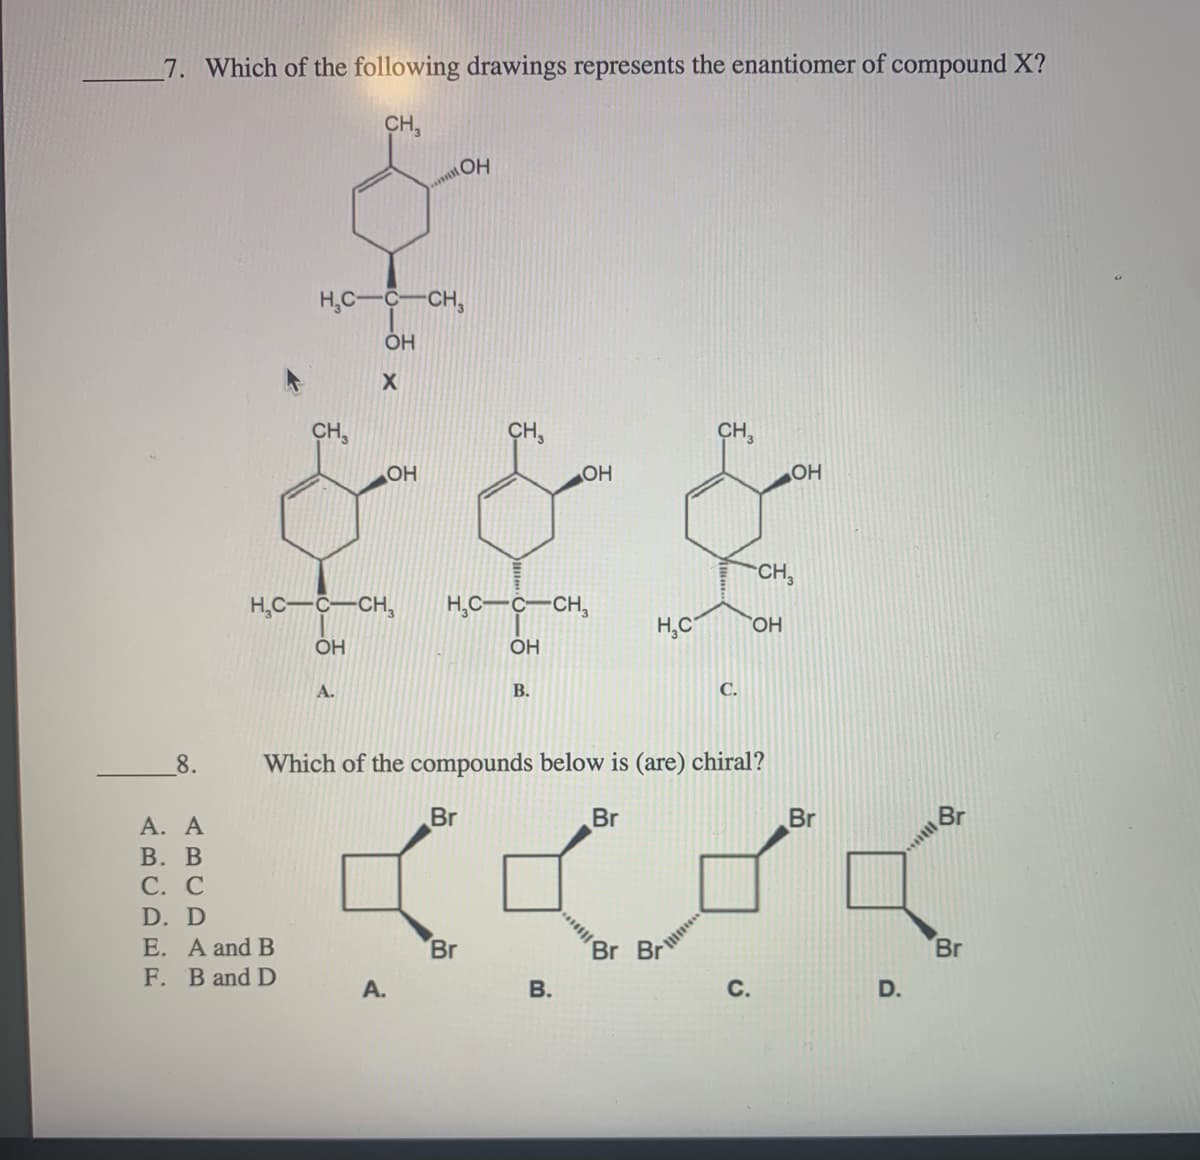 7. Which of the following drawings represents the enantiomer of compound X?
CH,
H,C-C-CH,
ОН
CH,
CH,
OH
OH
OH
CH,
H,C-C-CH,
H,C-C-CH,
H,C
HO,
ÓH
OH
A.
В.
С.
8.
Which of the compounds below is (are) chiral?
Br
А. А
В. В
С. С
Br
Br
Br
D. D
E. A and B
F. B and D
Br
Br
Br
А.
В.
D.
